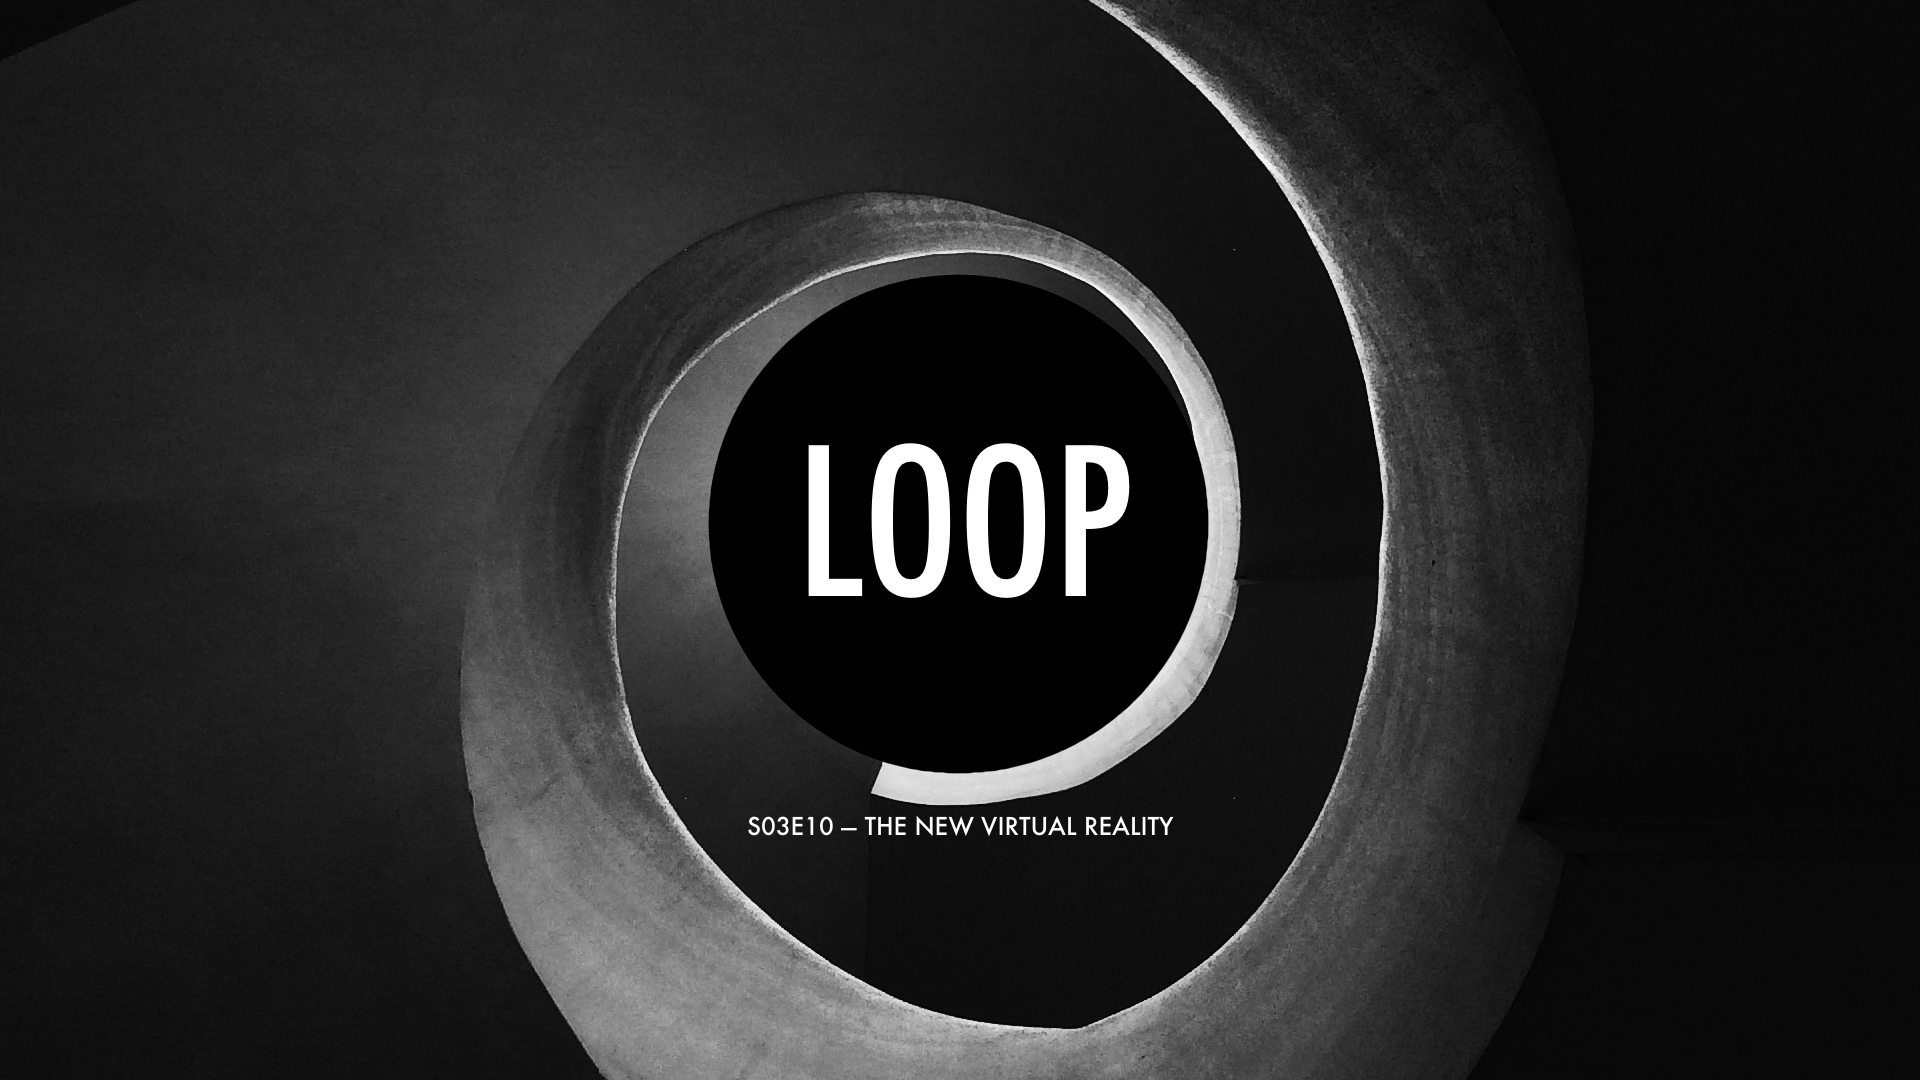 S03E10 The New Virtual Reality — The Digital Loop